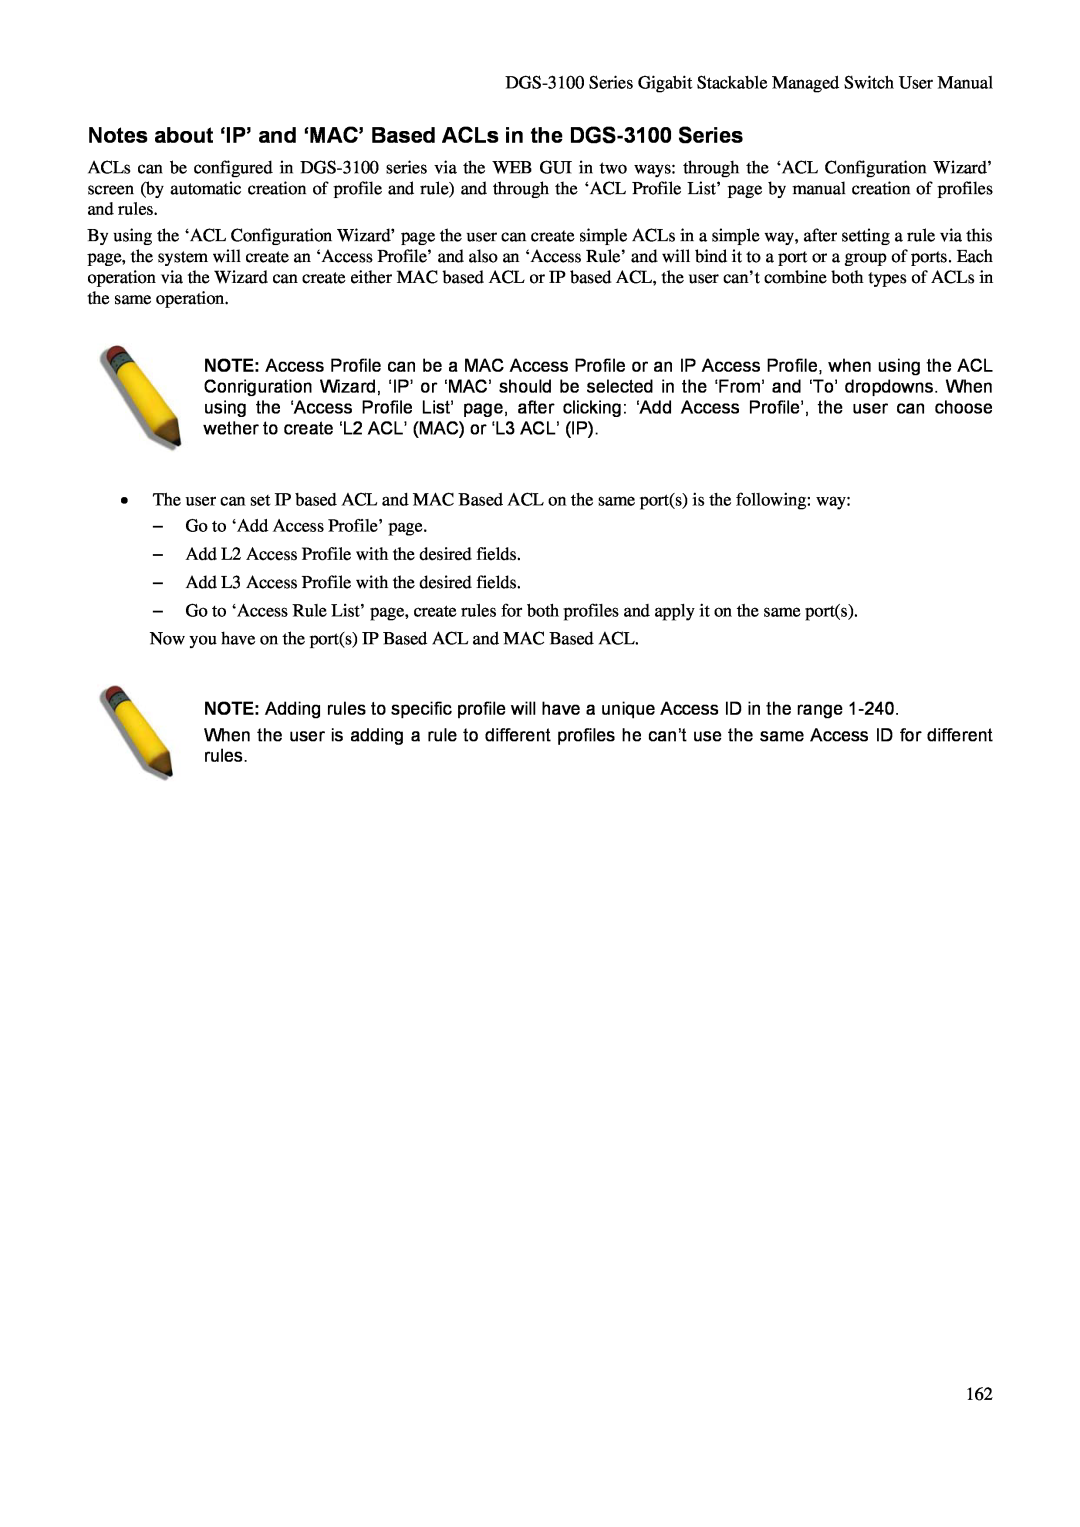 D-Link user manual Notes about ‘IP’ and ‘MAC’ Based ACLs in the DGS-3100 Series 